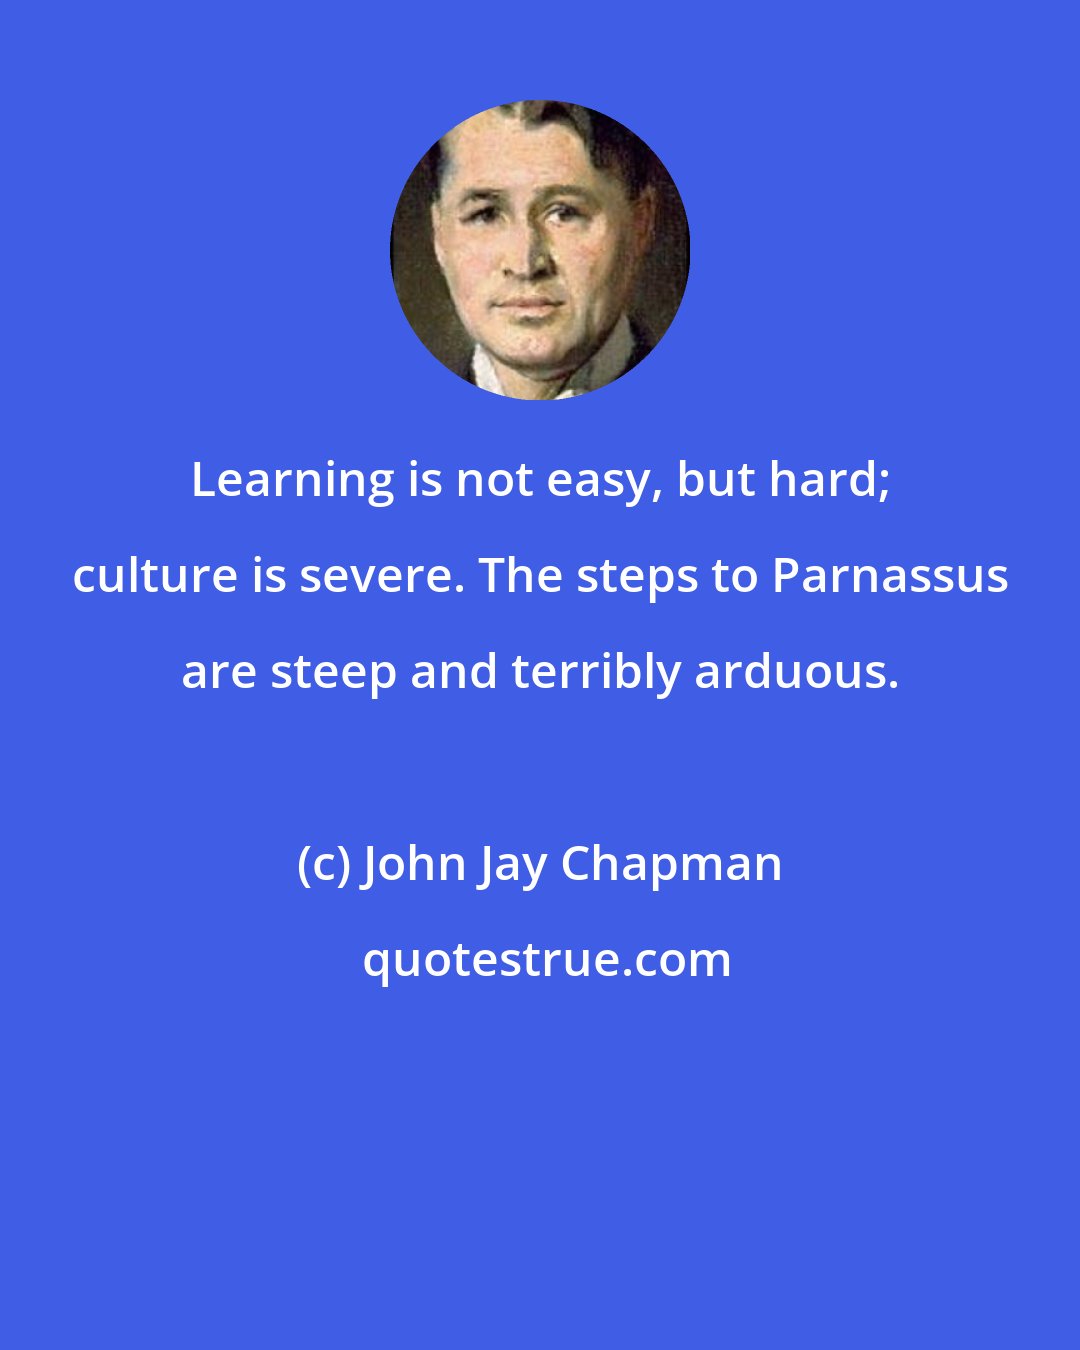 John Jay Chapman: Learning is not easy, but hard; culture is severe. The steps to Parnassus are steep and terribly arduous.